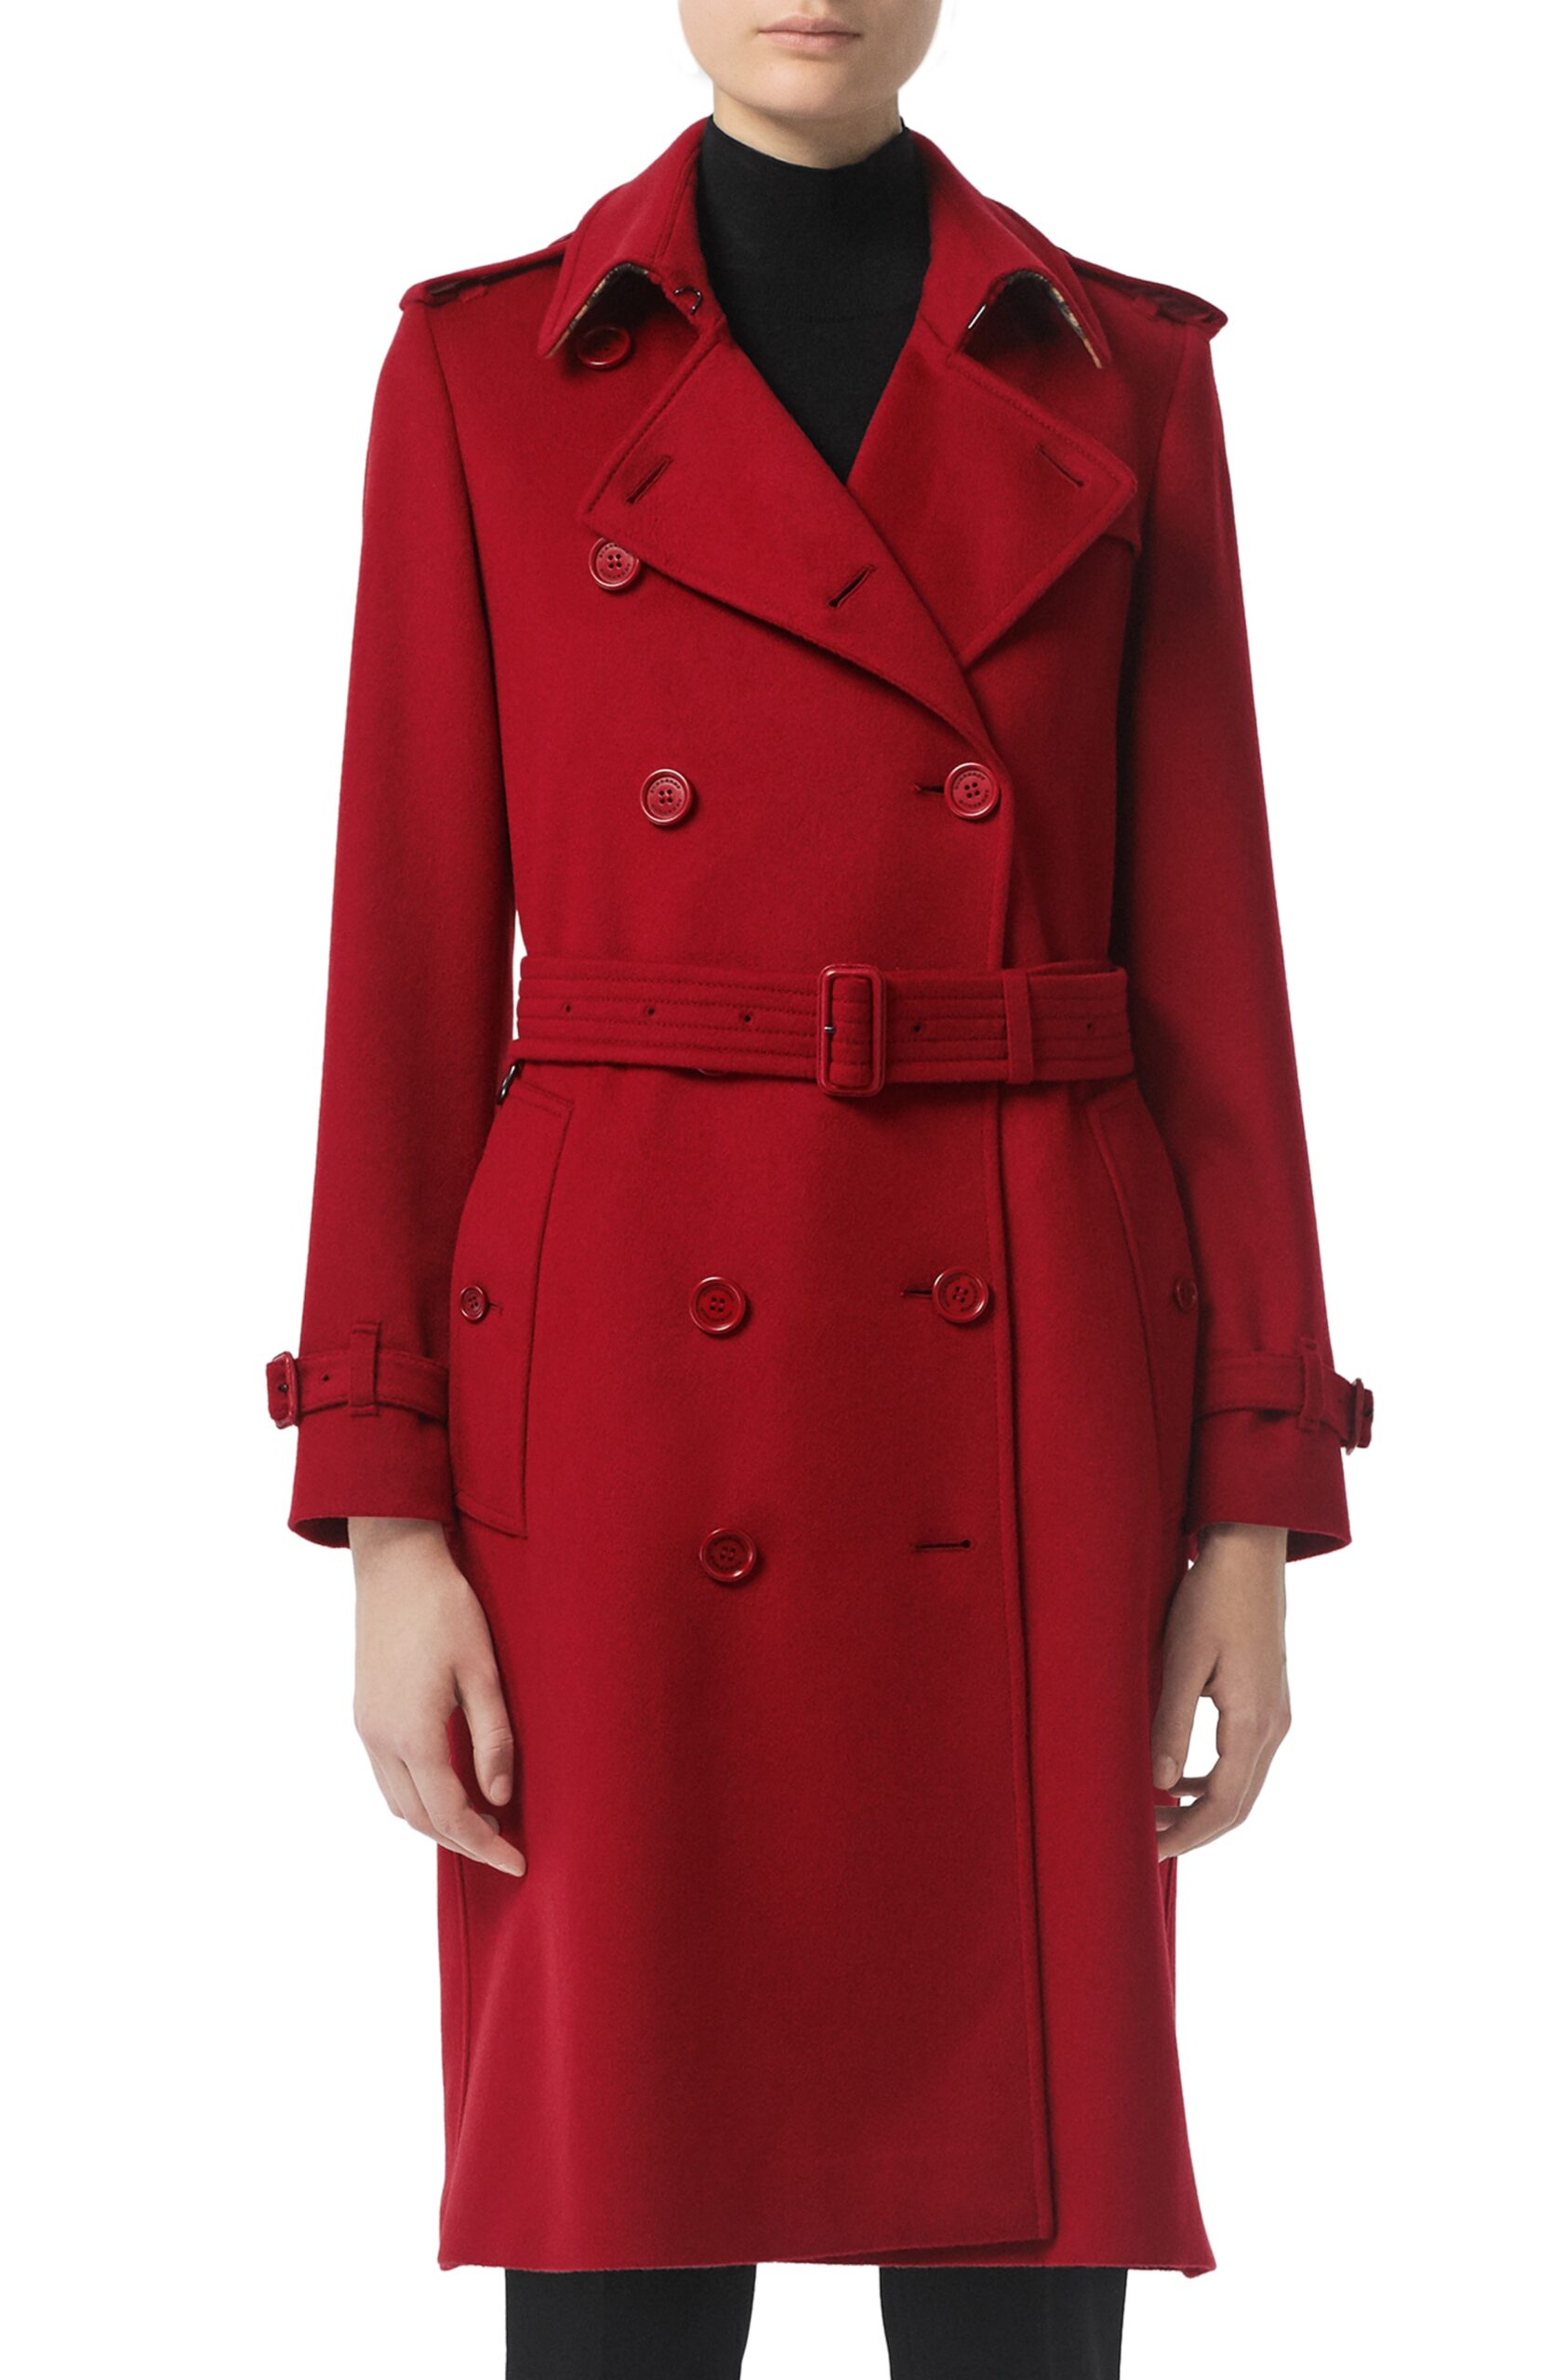 Enrich your wardrobe with the red
trench  coat